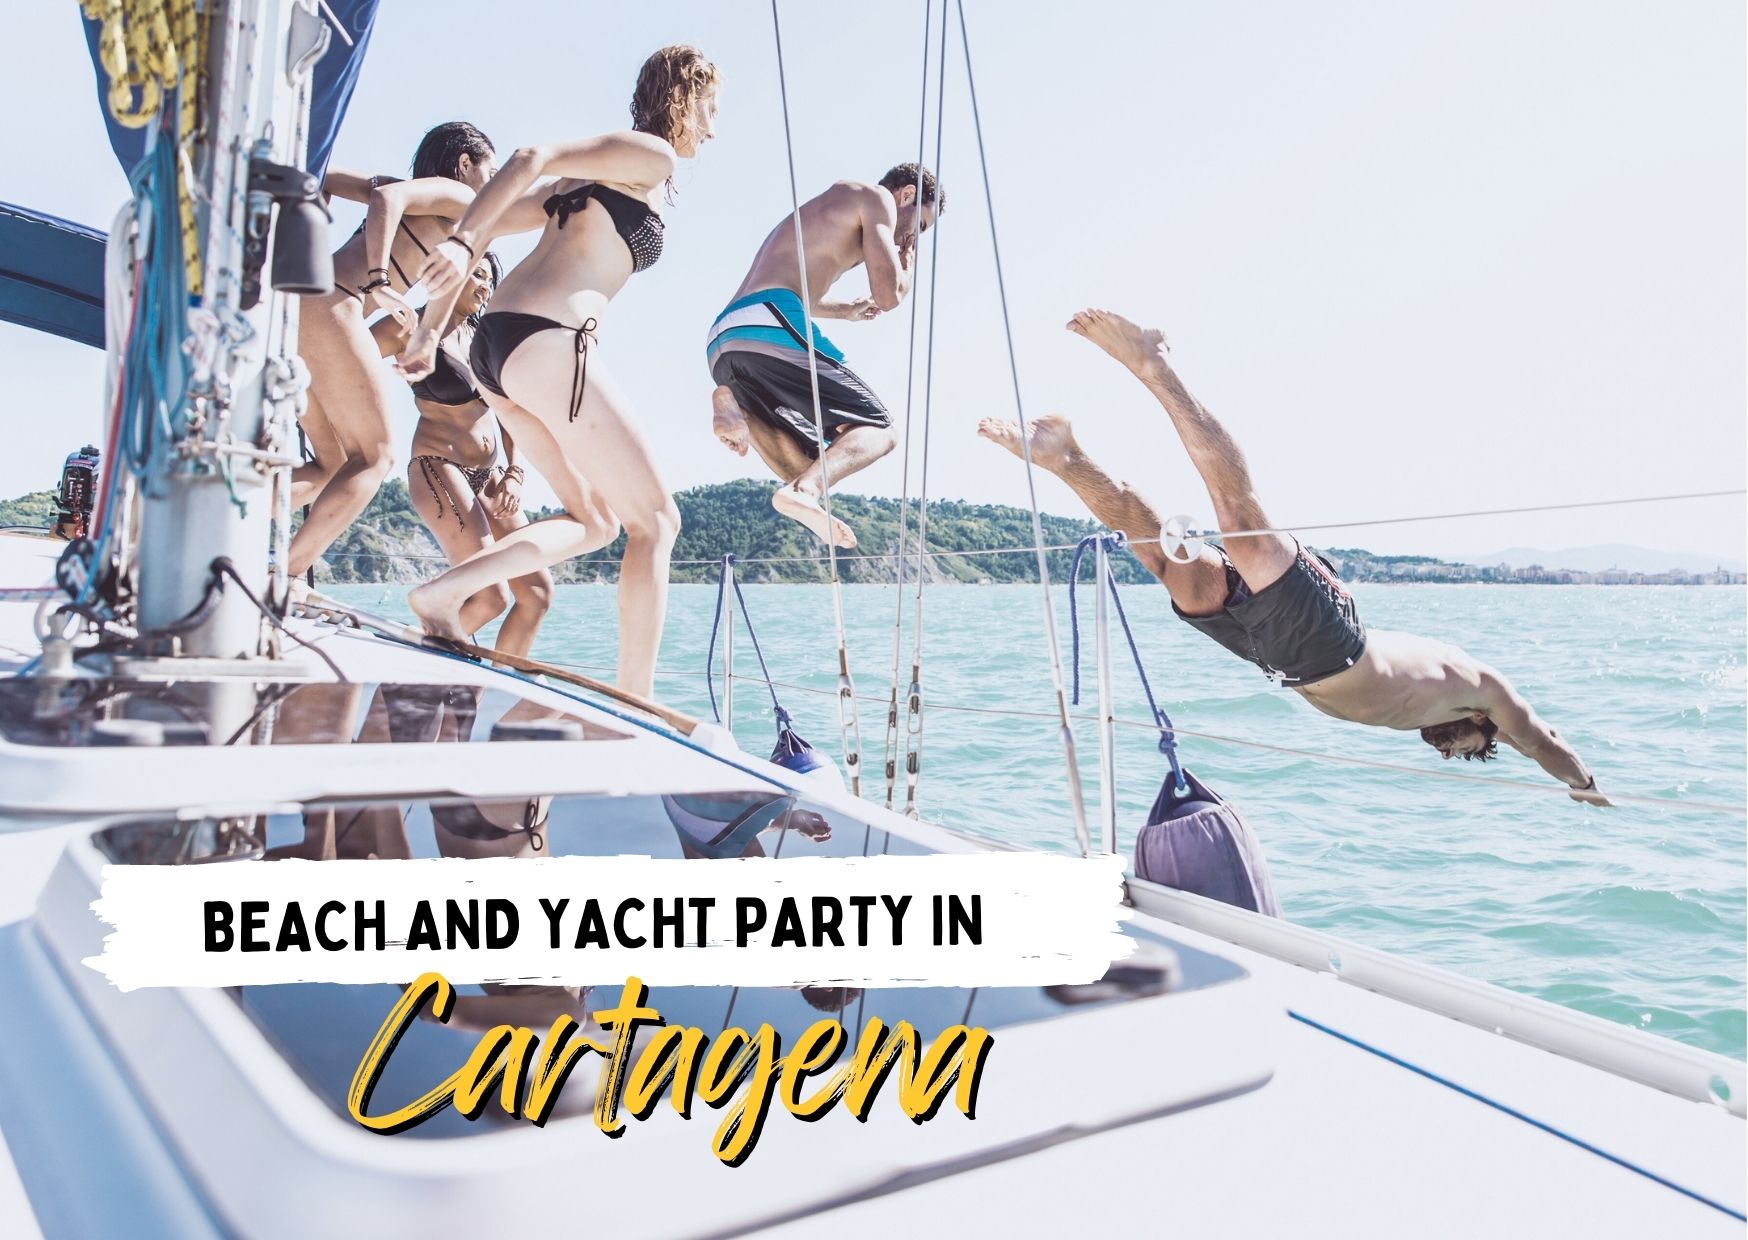 Beach and Yacht party in Cartagena